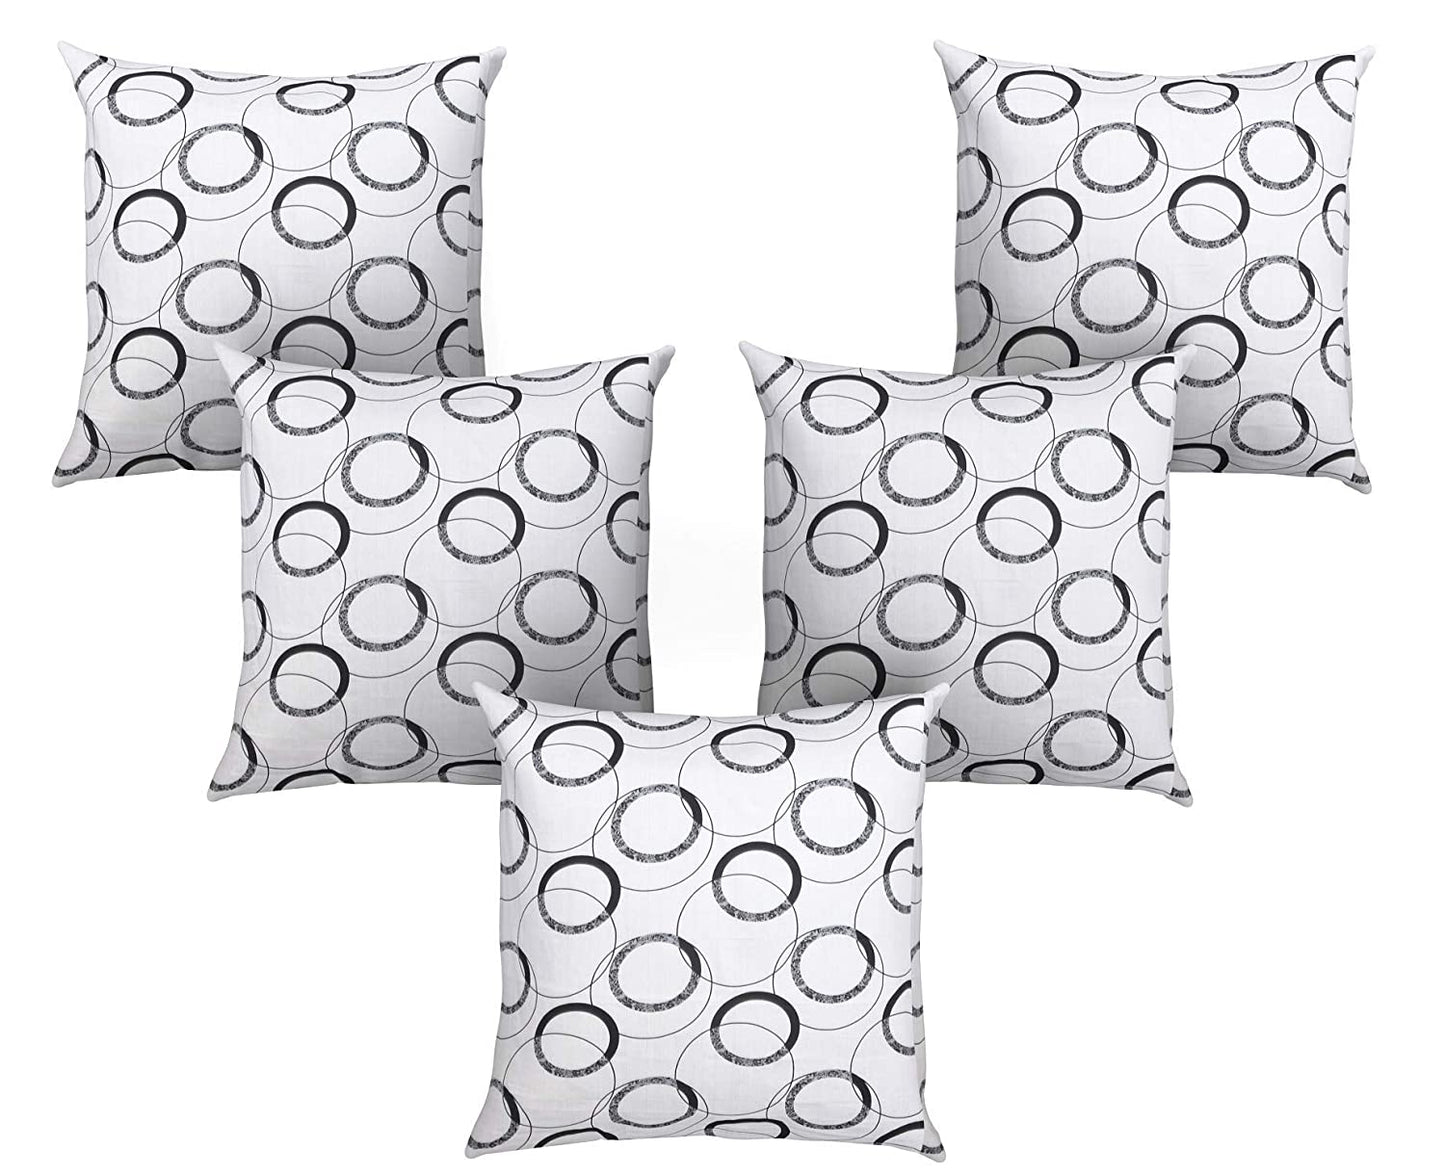 Cushion Covers: set of 5 Decorative Hand Made Pure 100% Cotton Throw/Pillow Cushion Covers - 16 x 16 inches